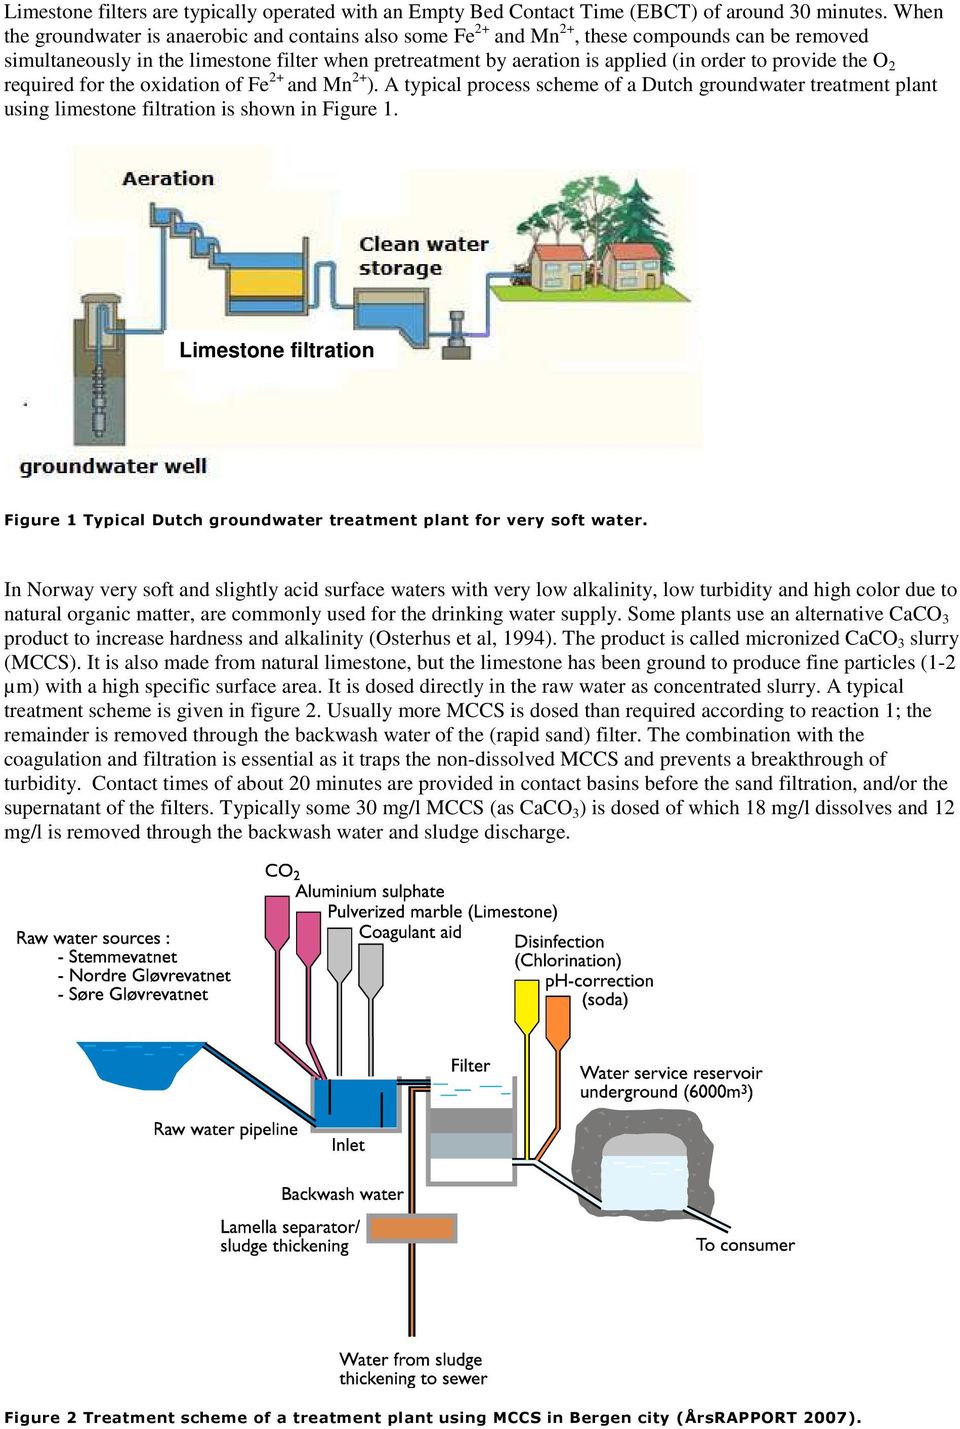 provide the O 2 required for the oxidation of Fe 2+ and Mn 2+ ). A typical process scheme of a Dutch groundwater treatment plant using limestone filtration is shown in Figure 1.